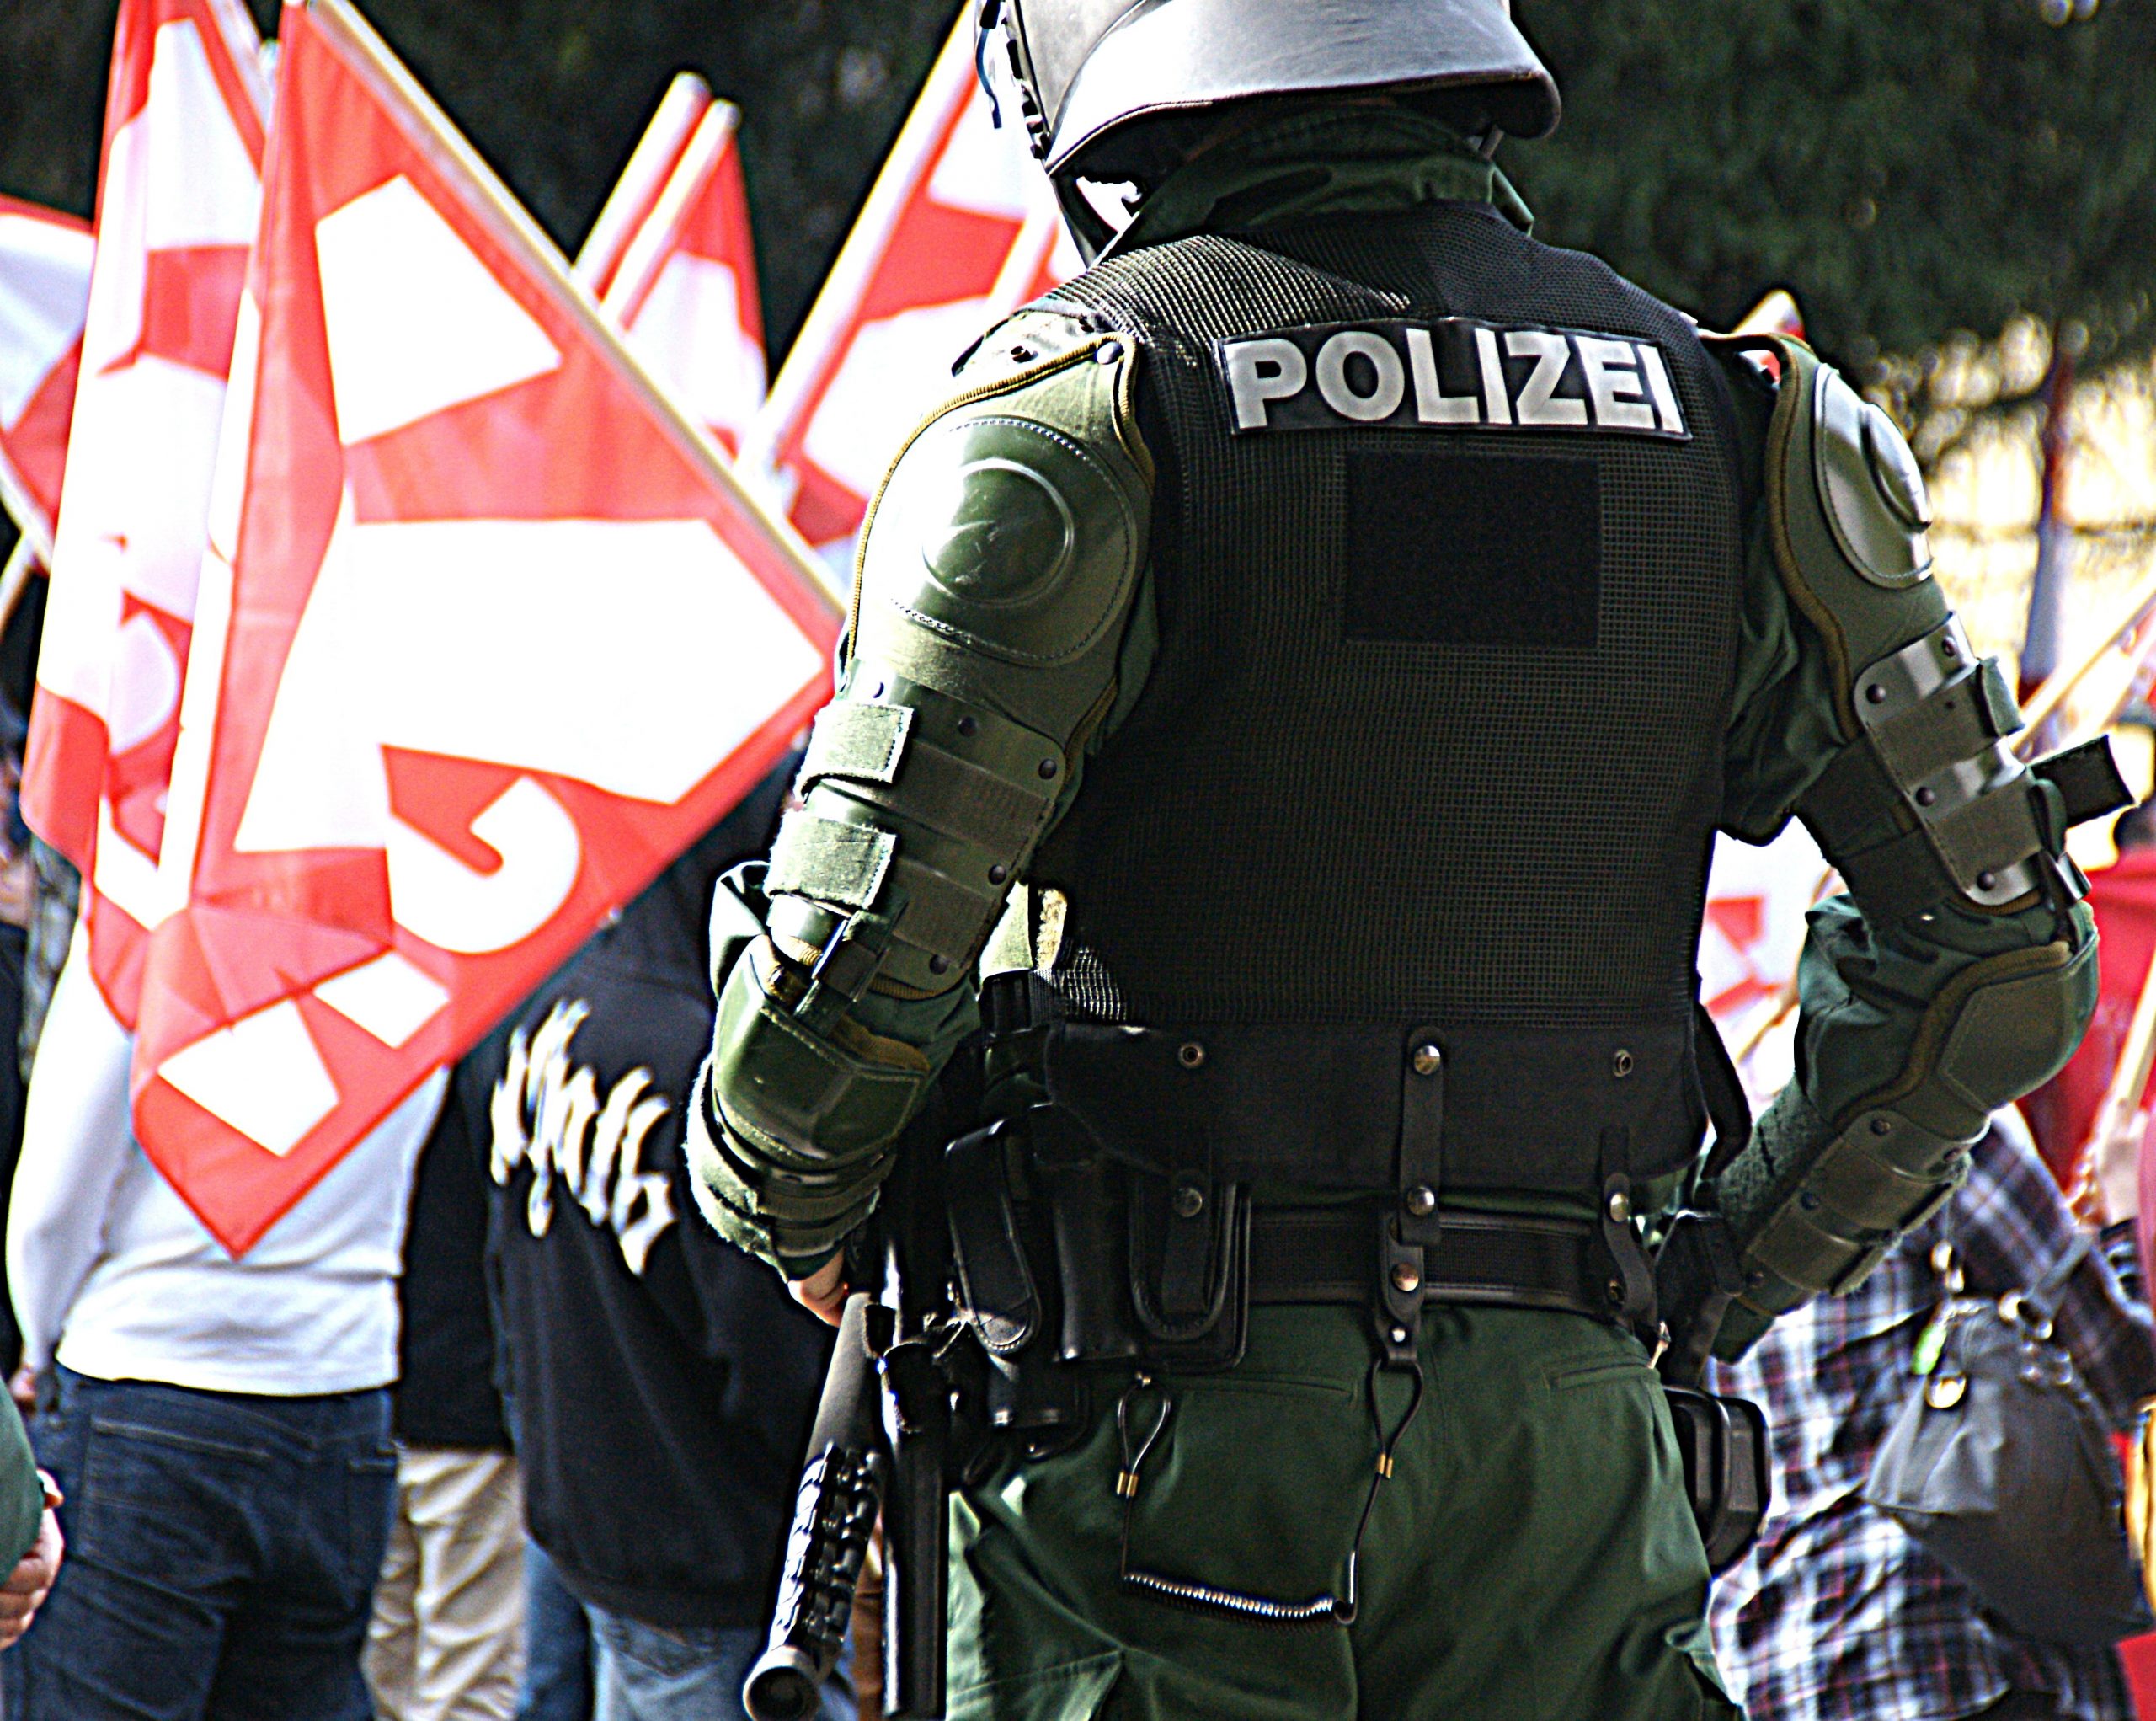 Austrian officials seize weapons destined for Germany’s far-right